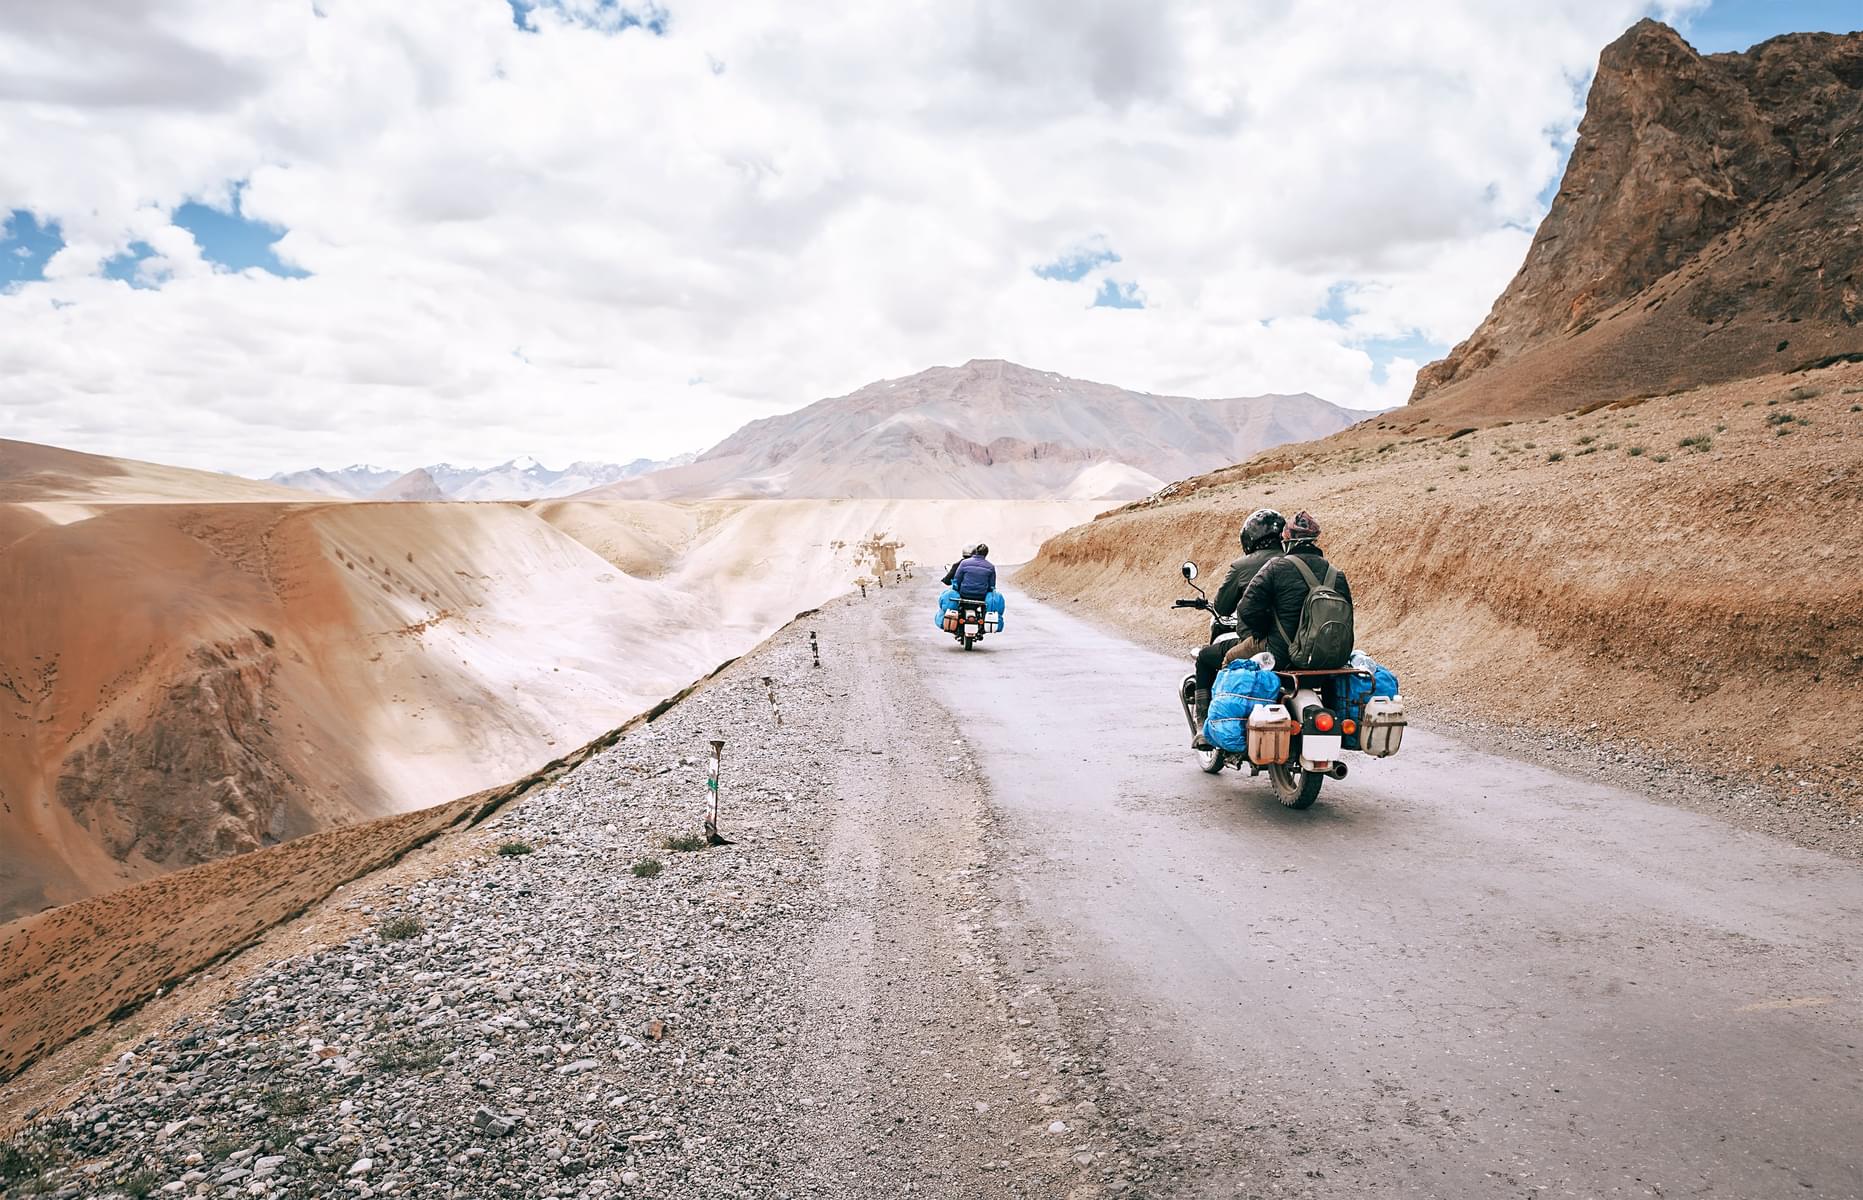 Take on the challenge of a Ladakh bike tour and enjoy the thrill of riding through the breathtaking Himalayan scenery.